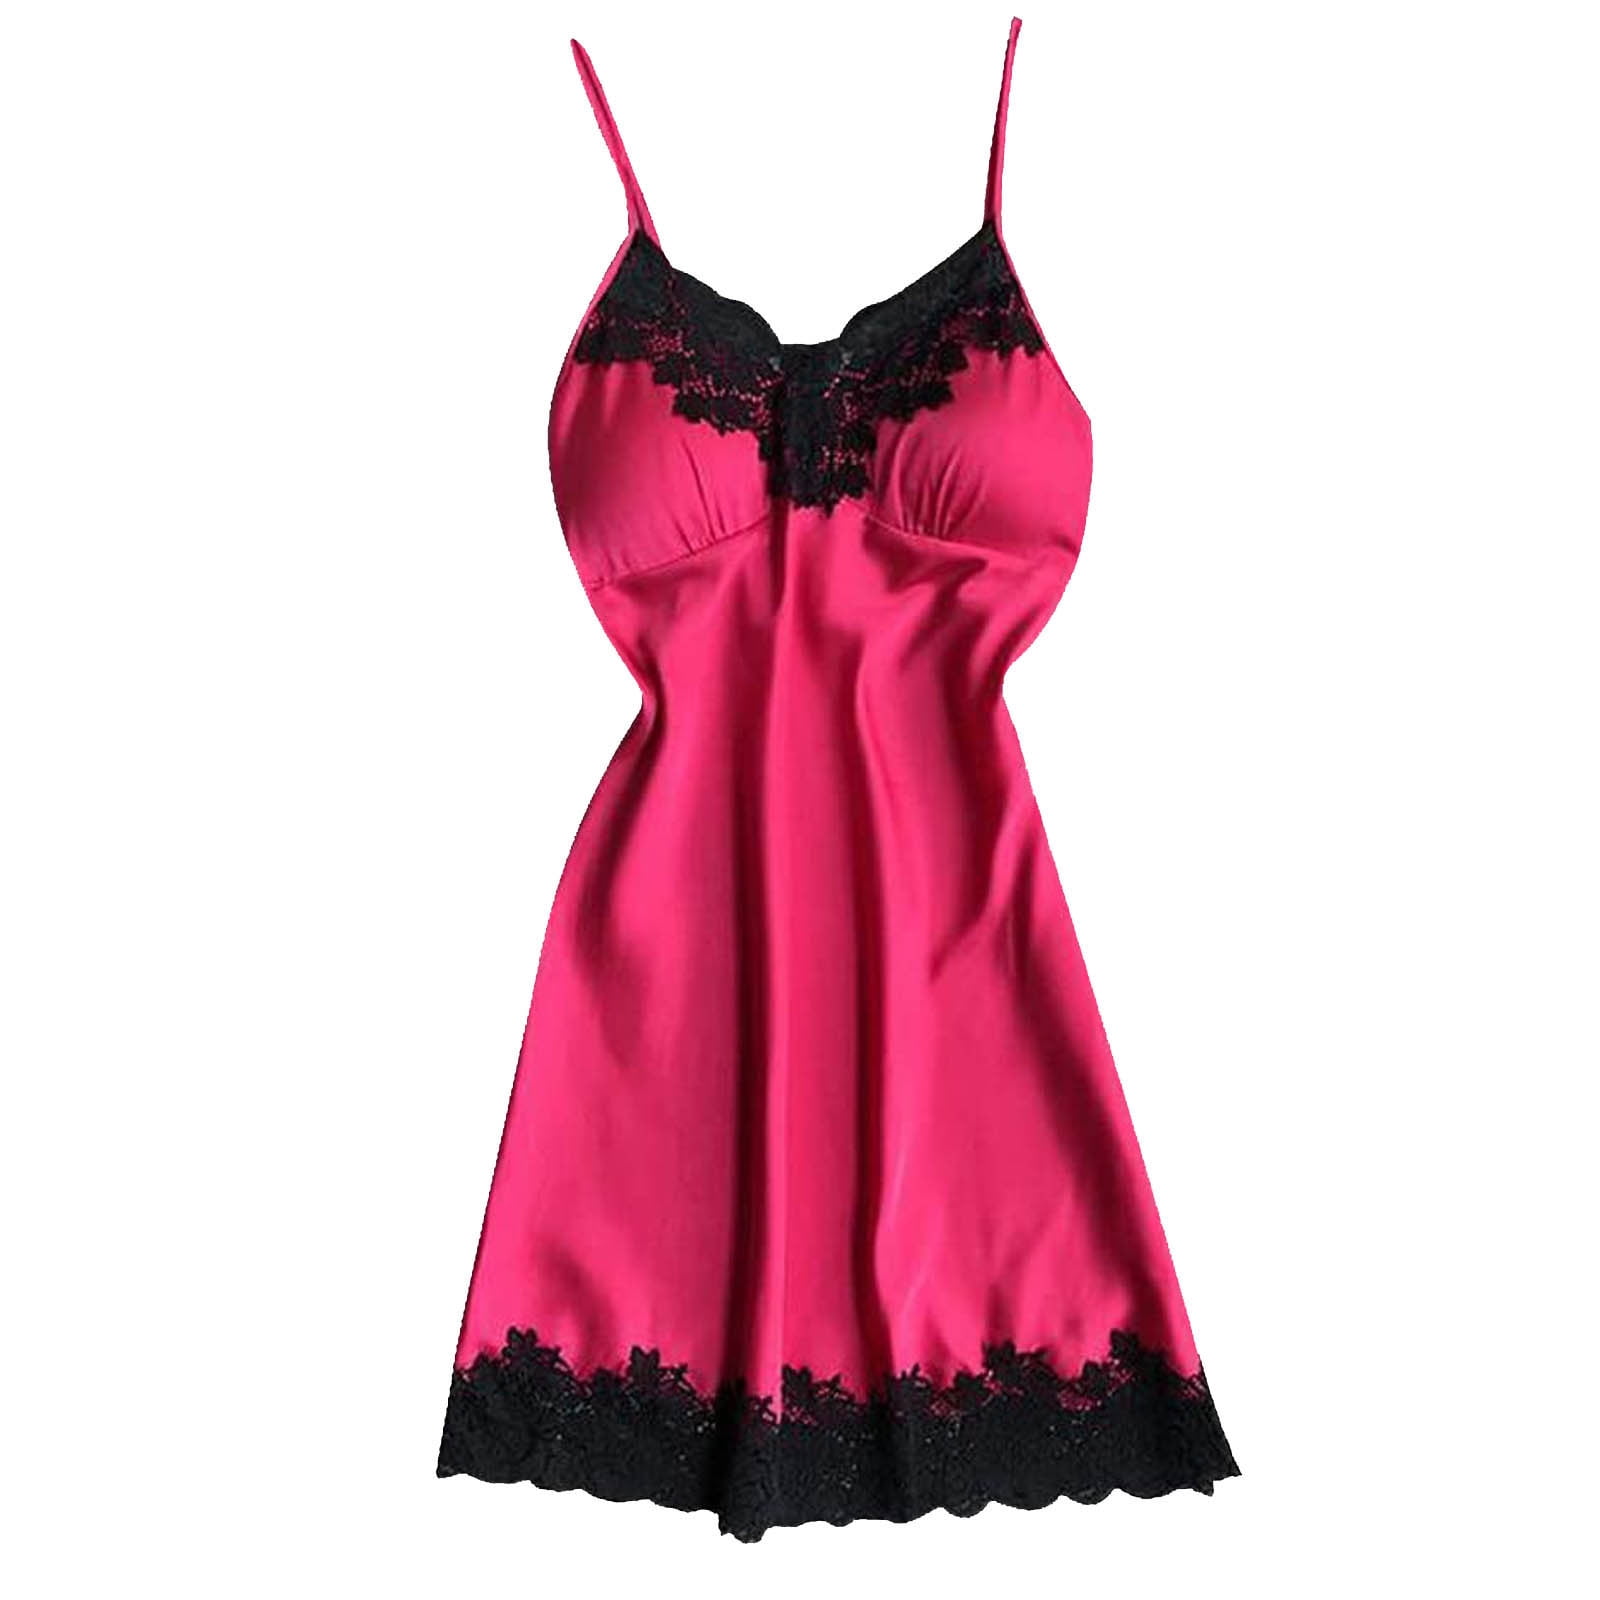 JGTDBPO Sexy Robes For Women Lingerie Solid Color Sleeveless Lace Sexy ...